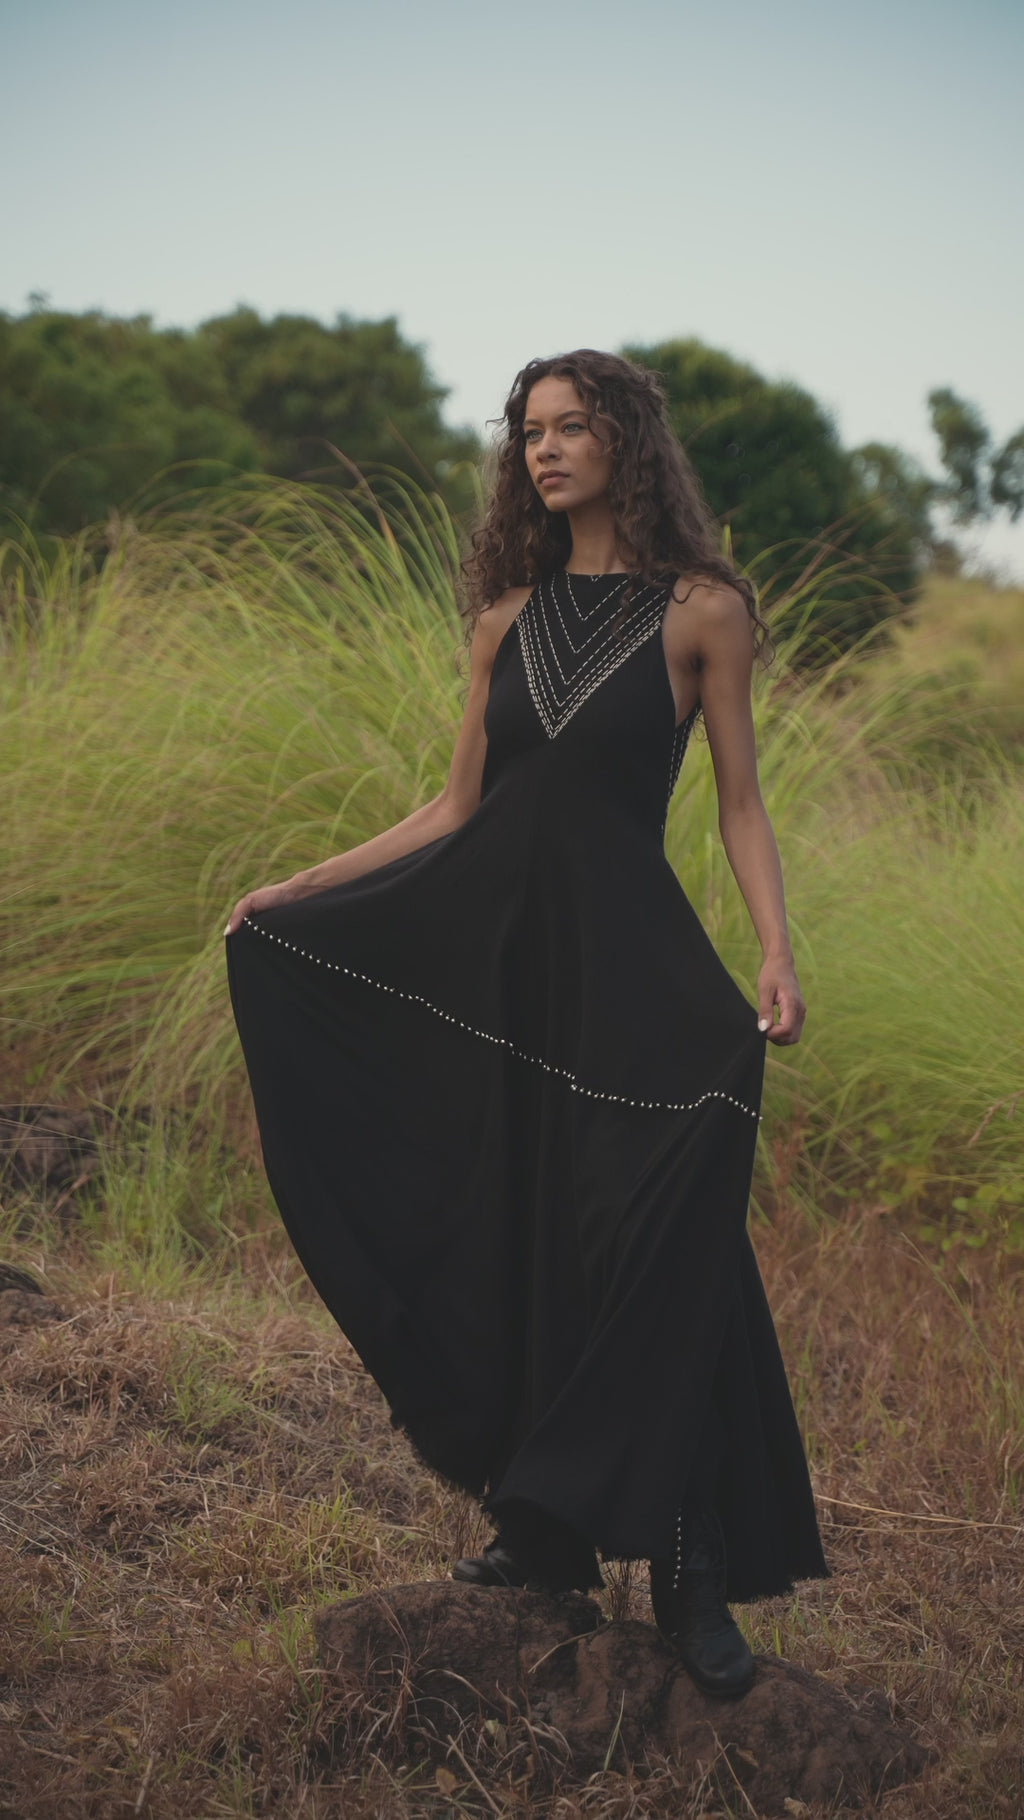 Hand-embroidered Black Goddess Dress, featuring a minimalist boho A-line design. Perfect for cocktails and casual events, crafted from organic materials with delicate ring bell details.